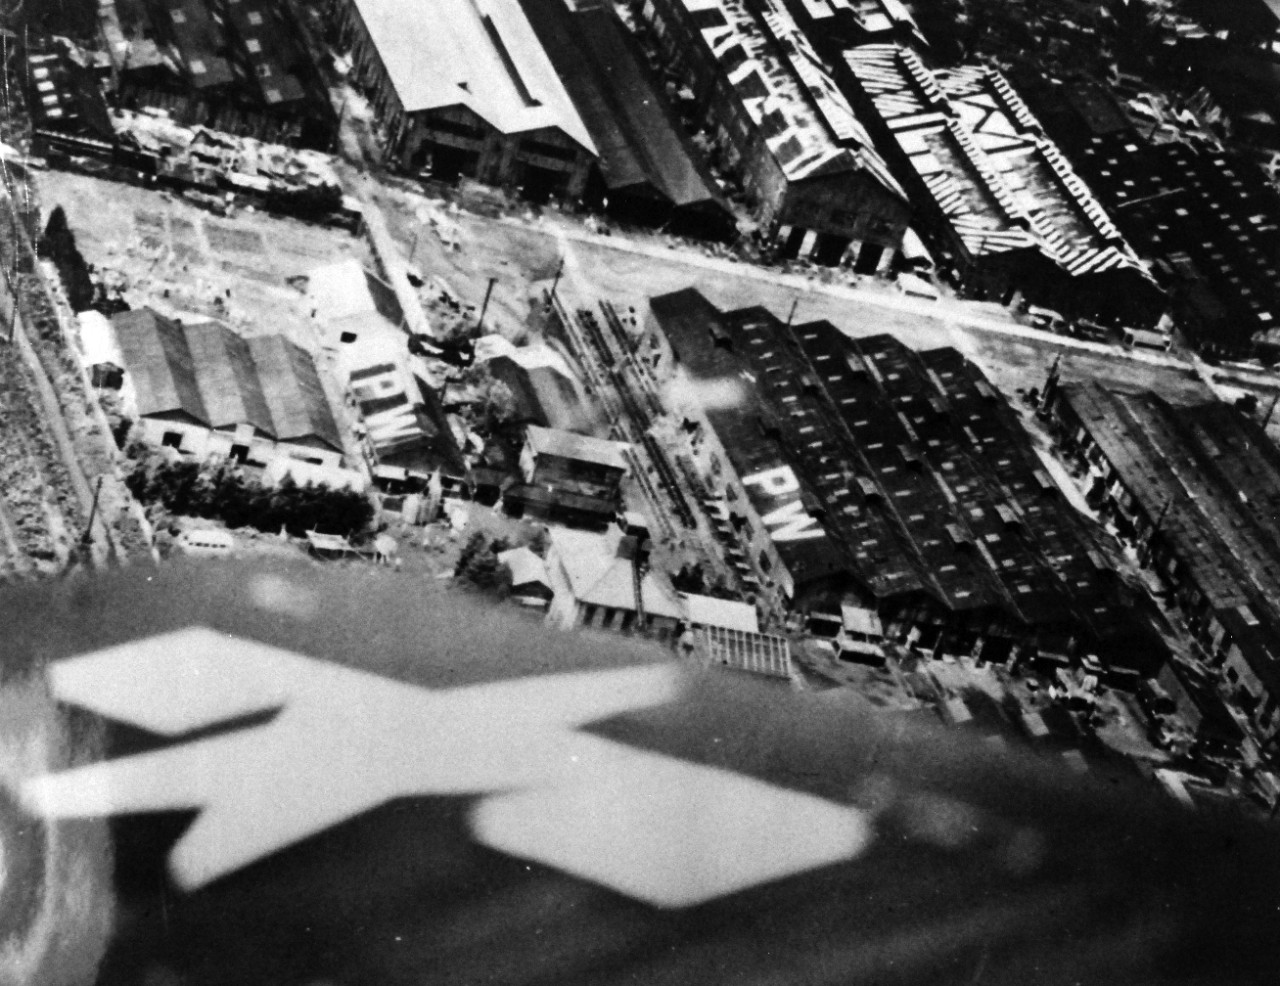 80-G-490390:  Allied Prisoner of War Camp, Tokyo, 1945.  Low aerial of Allied prisoners of war in Tokyo, Japan, area.  Photographed after food was dropped from planes. Note the PW on the rooftops. Released August 29, 1945.  .  Official U.S. Navy Photograph, now in the collections of the National Archives.   (2015/11/10).